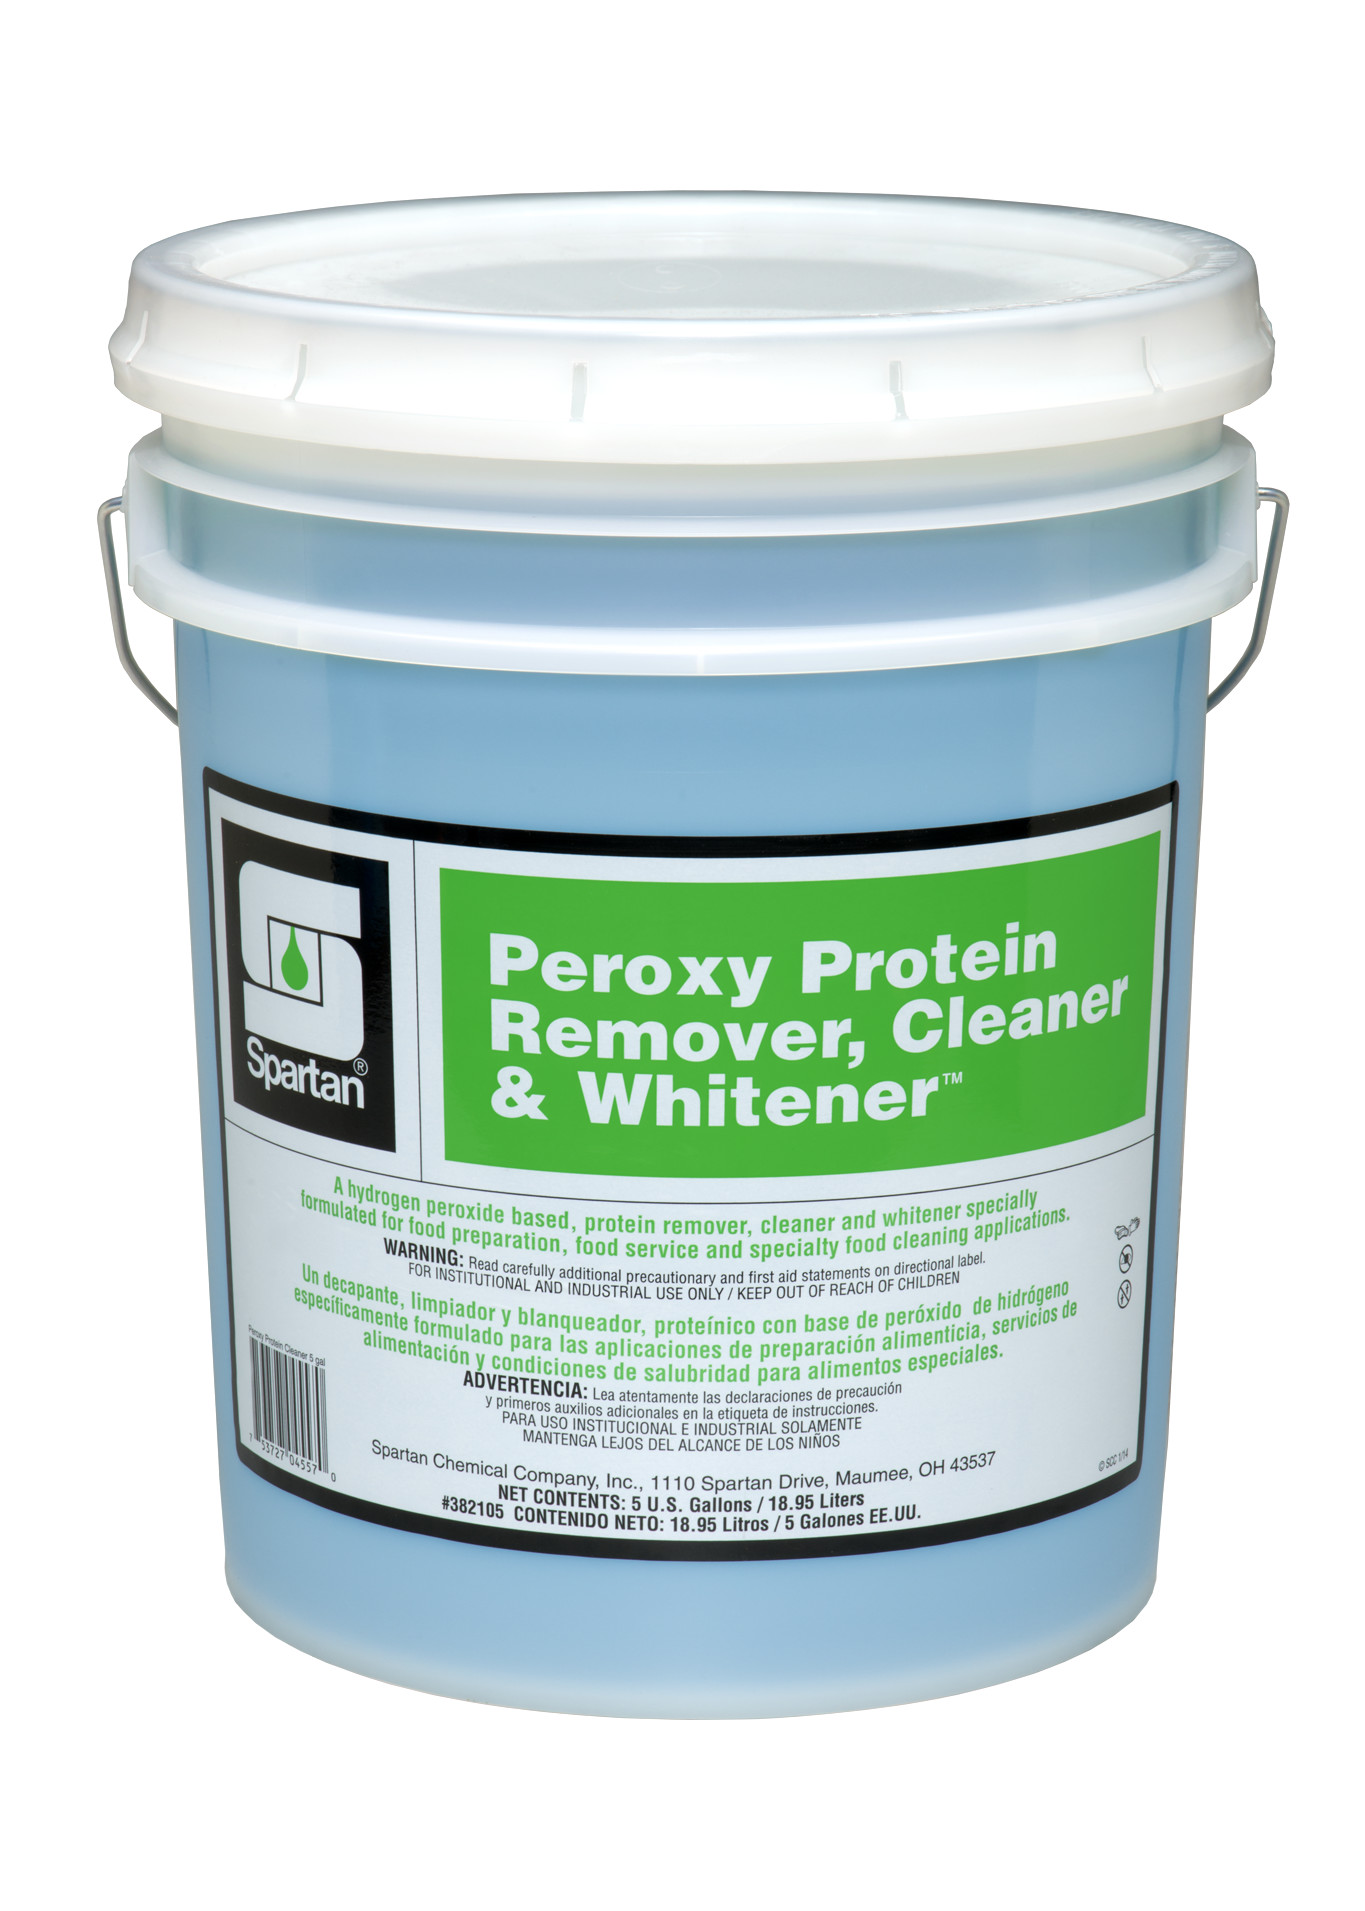 Spartan Chemical Company Peroxy Protein Remover, Cleaner & Whitener, 5 GAL PAIL